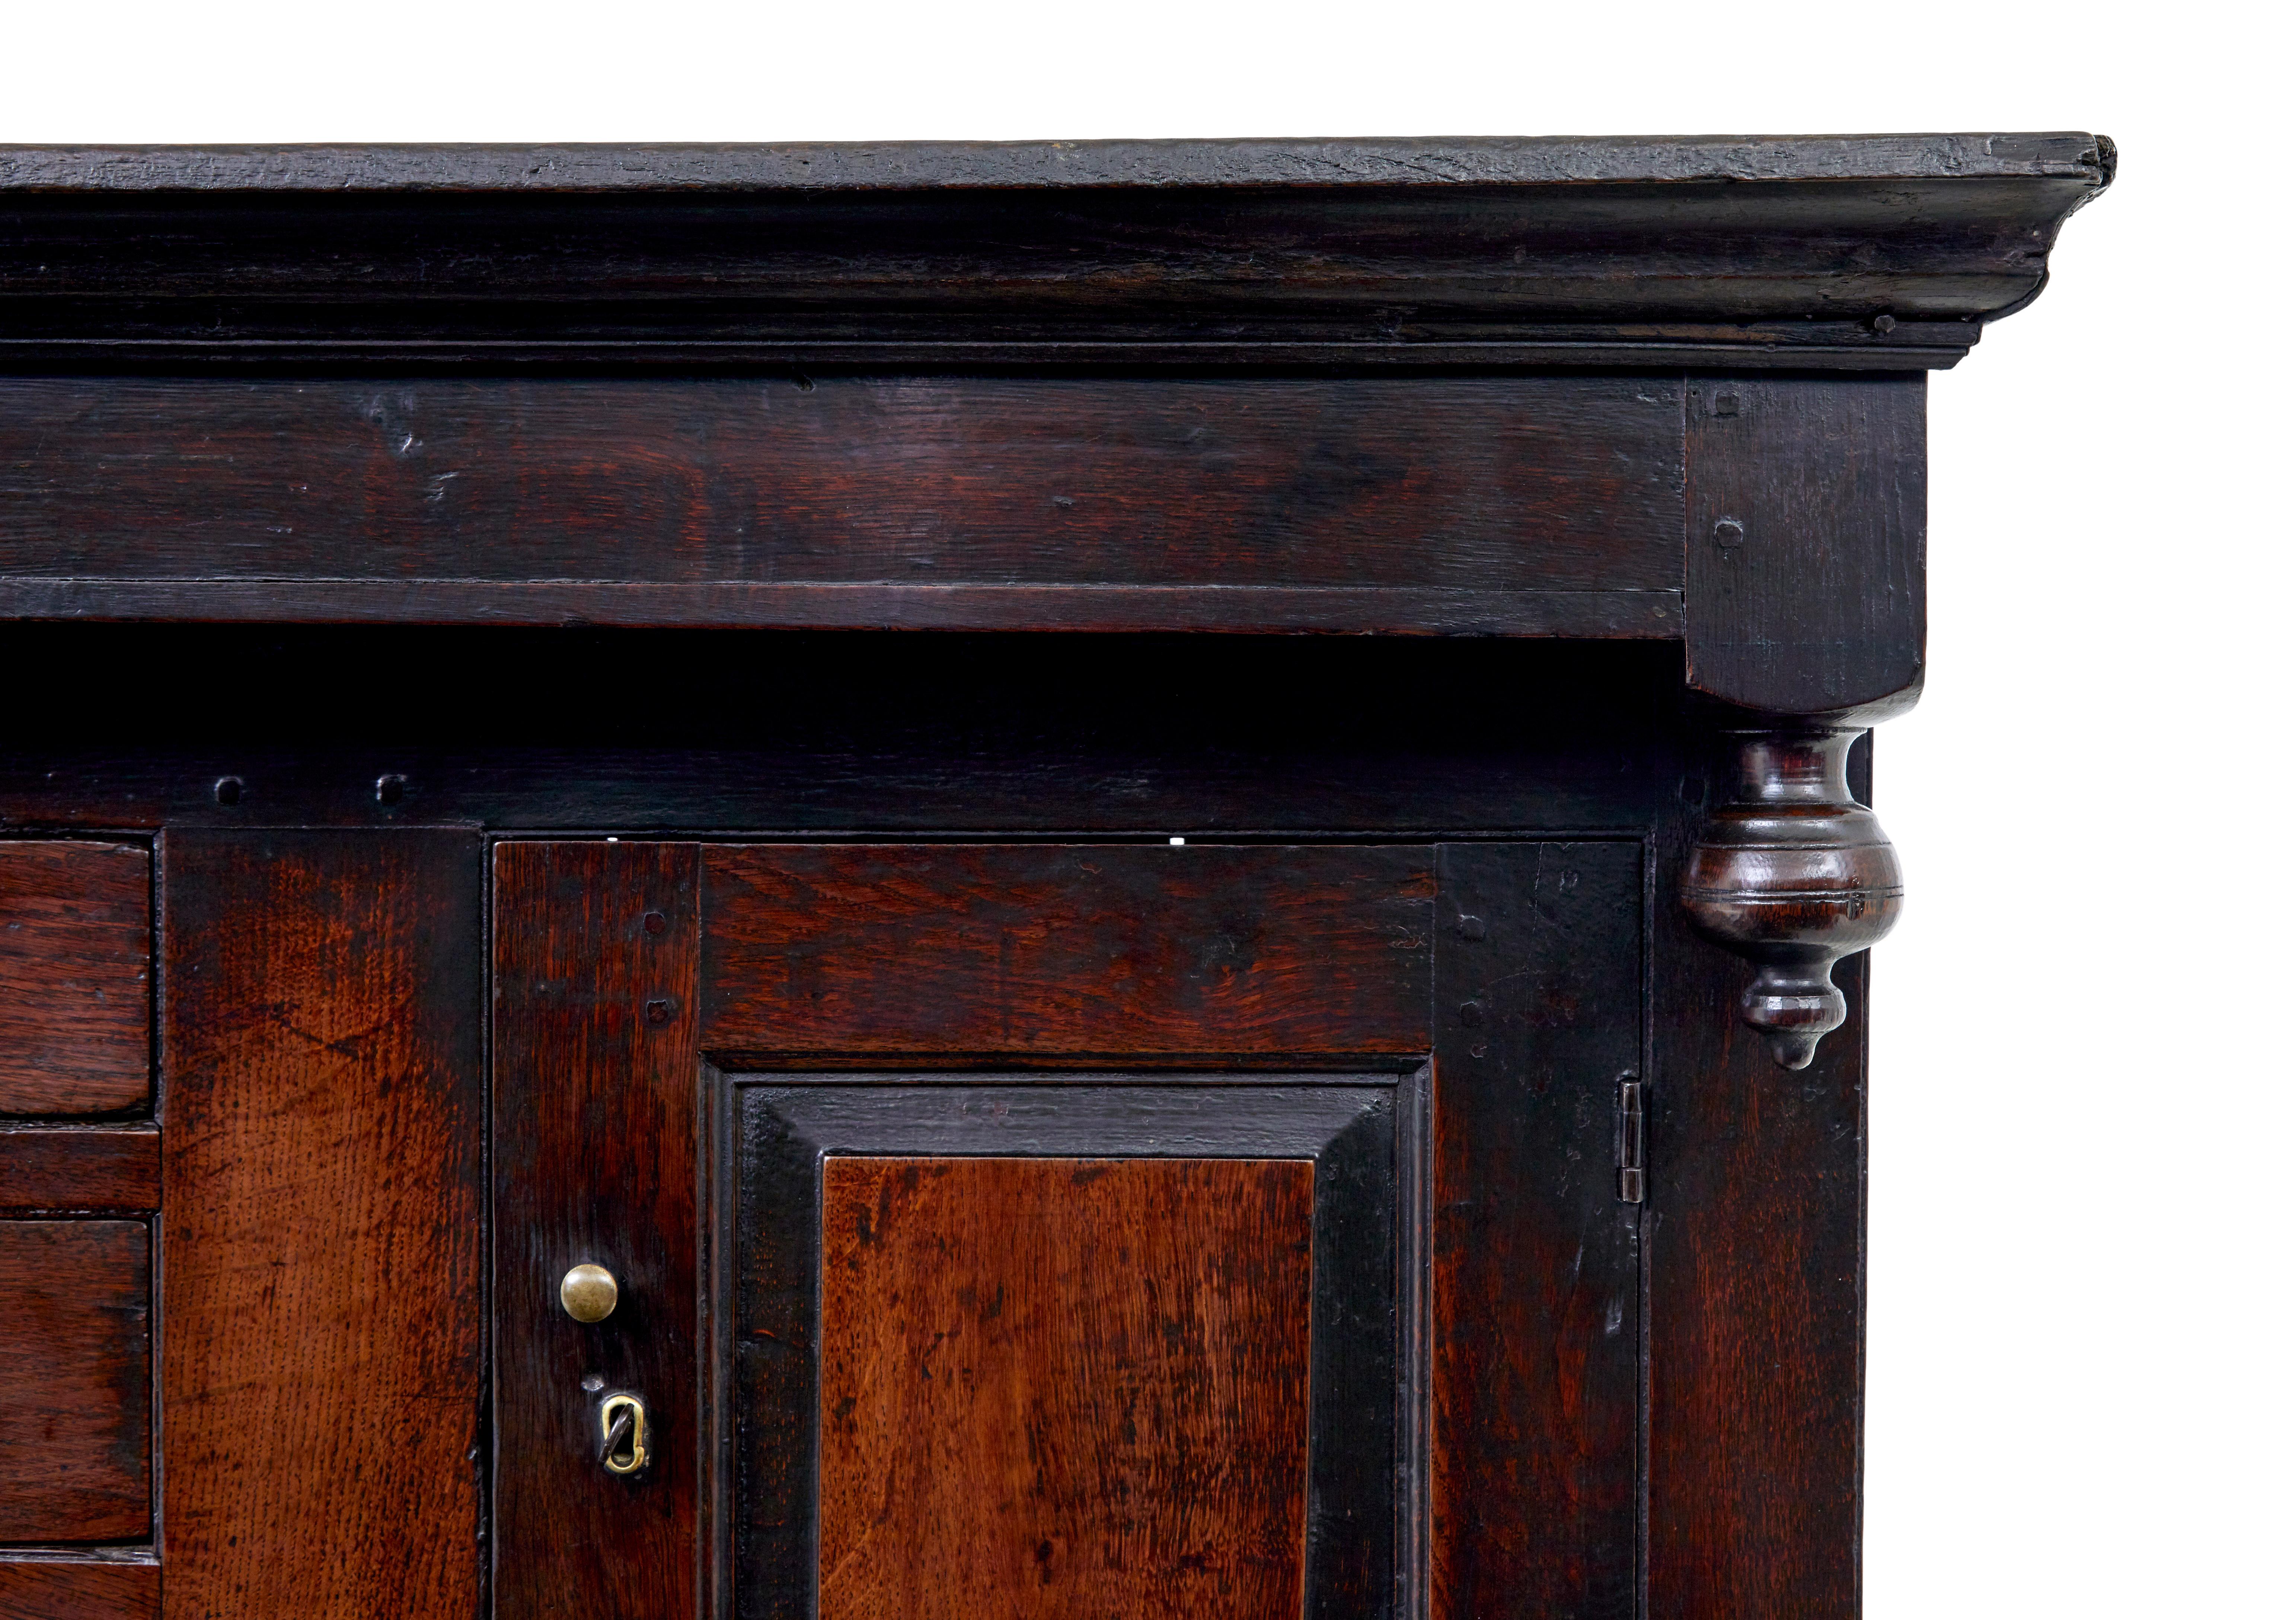 17th century Welsh carved oak court cupboard circa 1680.

Comprising of 2 parts.

Top section with a central bank of drawers flanked either side by a single door cupboard.

Bottom section with 3 drawers below which a double door cupboard containing